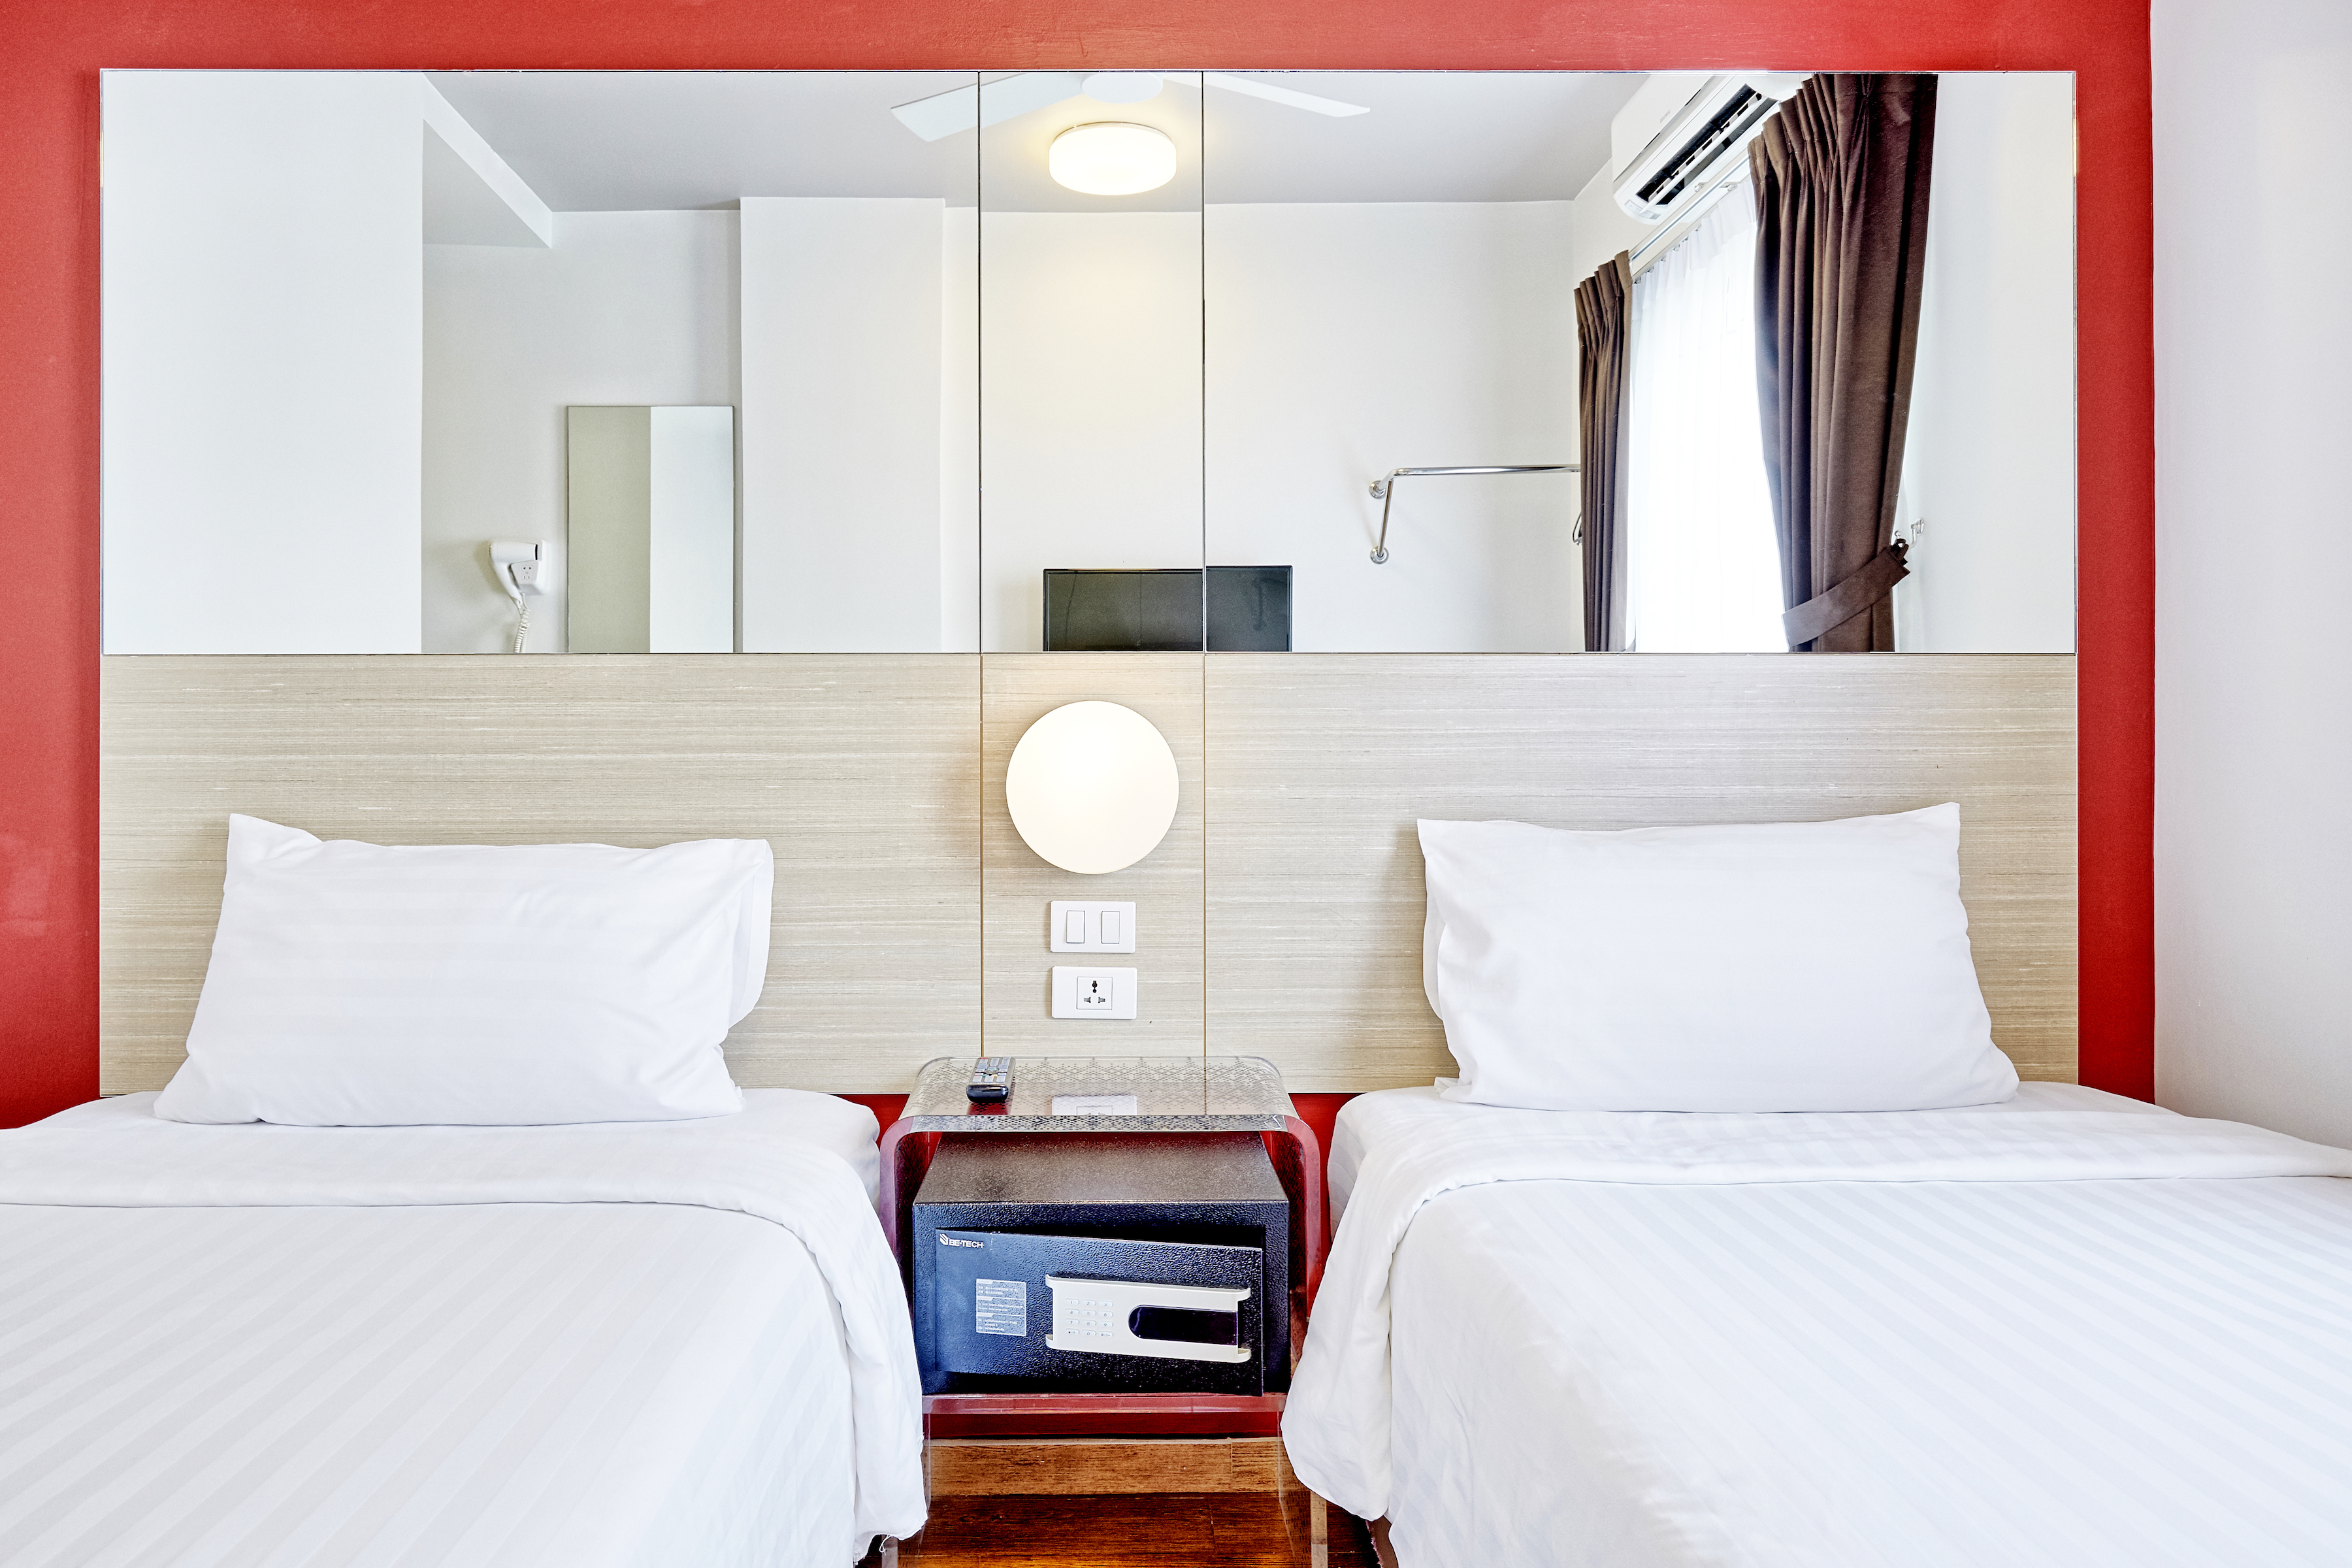 Red Planet Phuket Patong Extra Plus)-Phuket Updated 2023 Room Price-Reviews & Deals | Trip.com